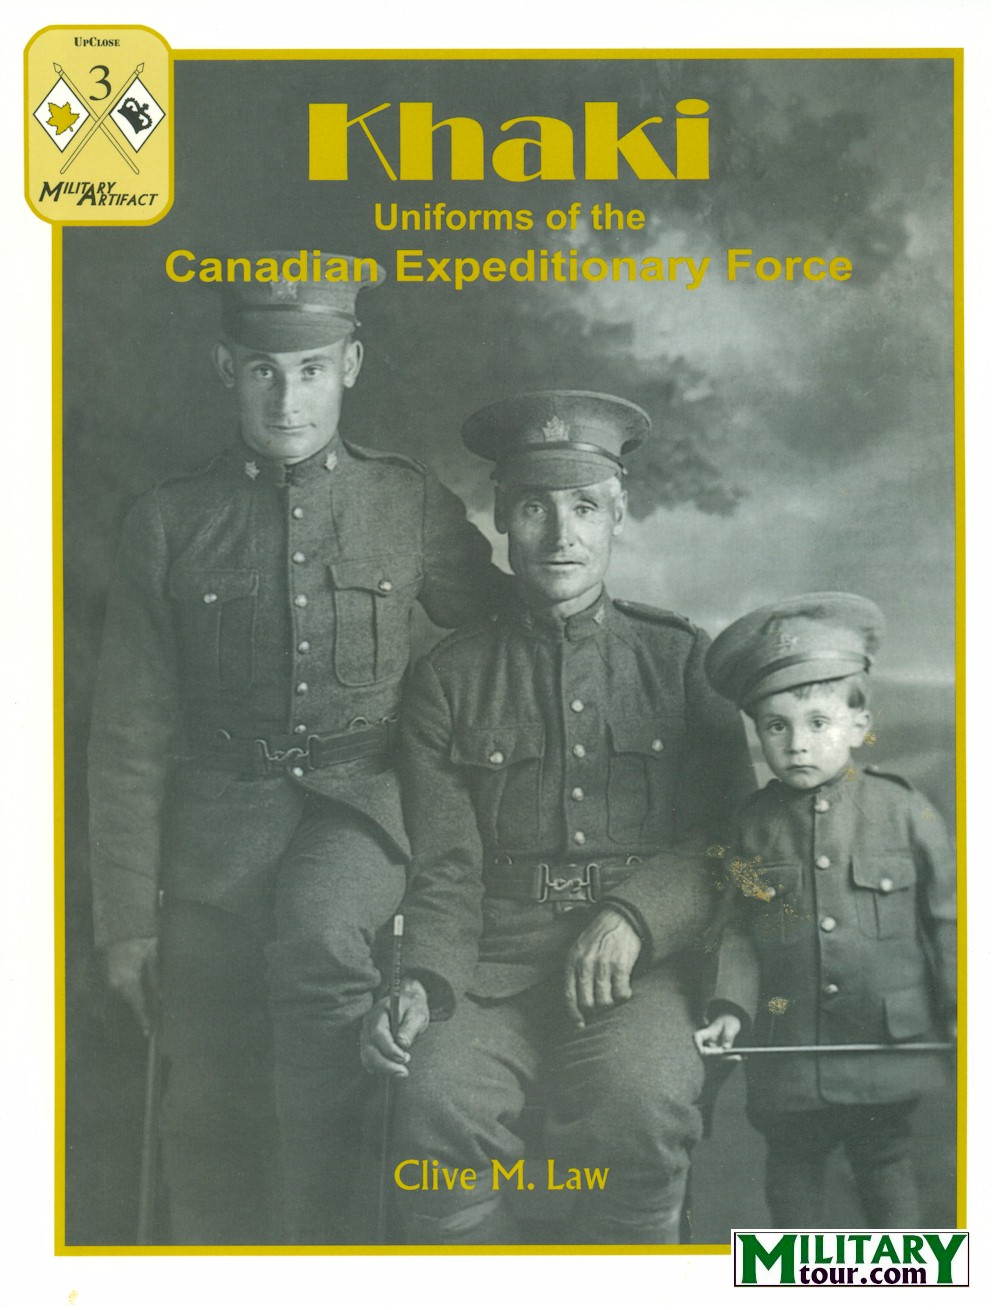 KHAKI UNIFORMS OF THE CANADIAN EXPEDITIONARY FORCE BOOK